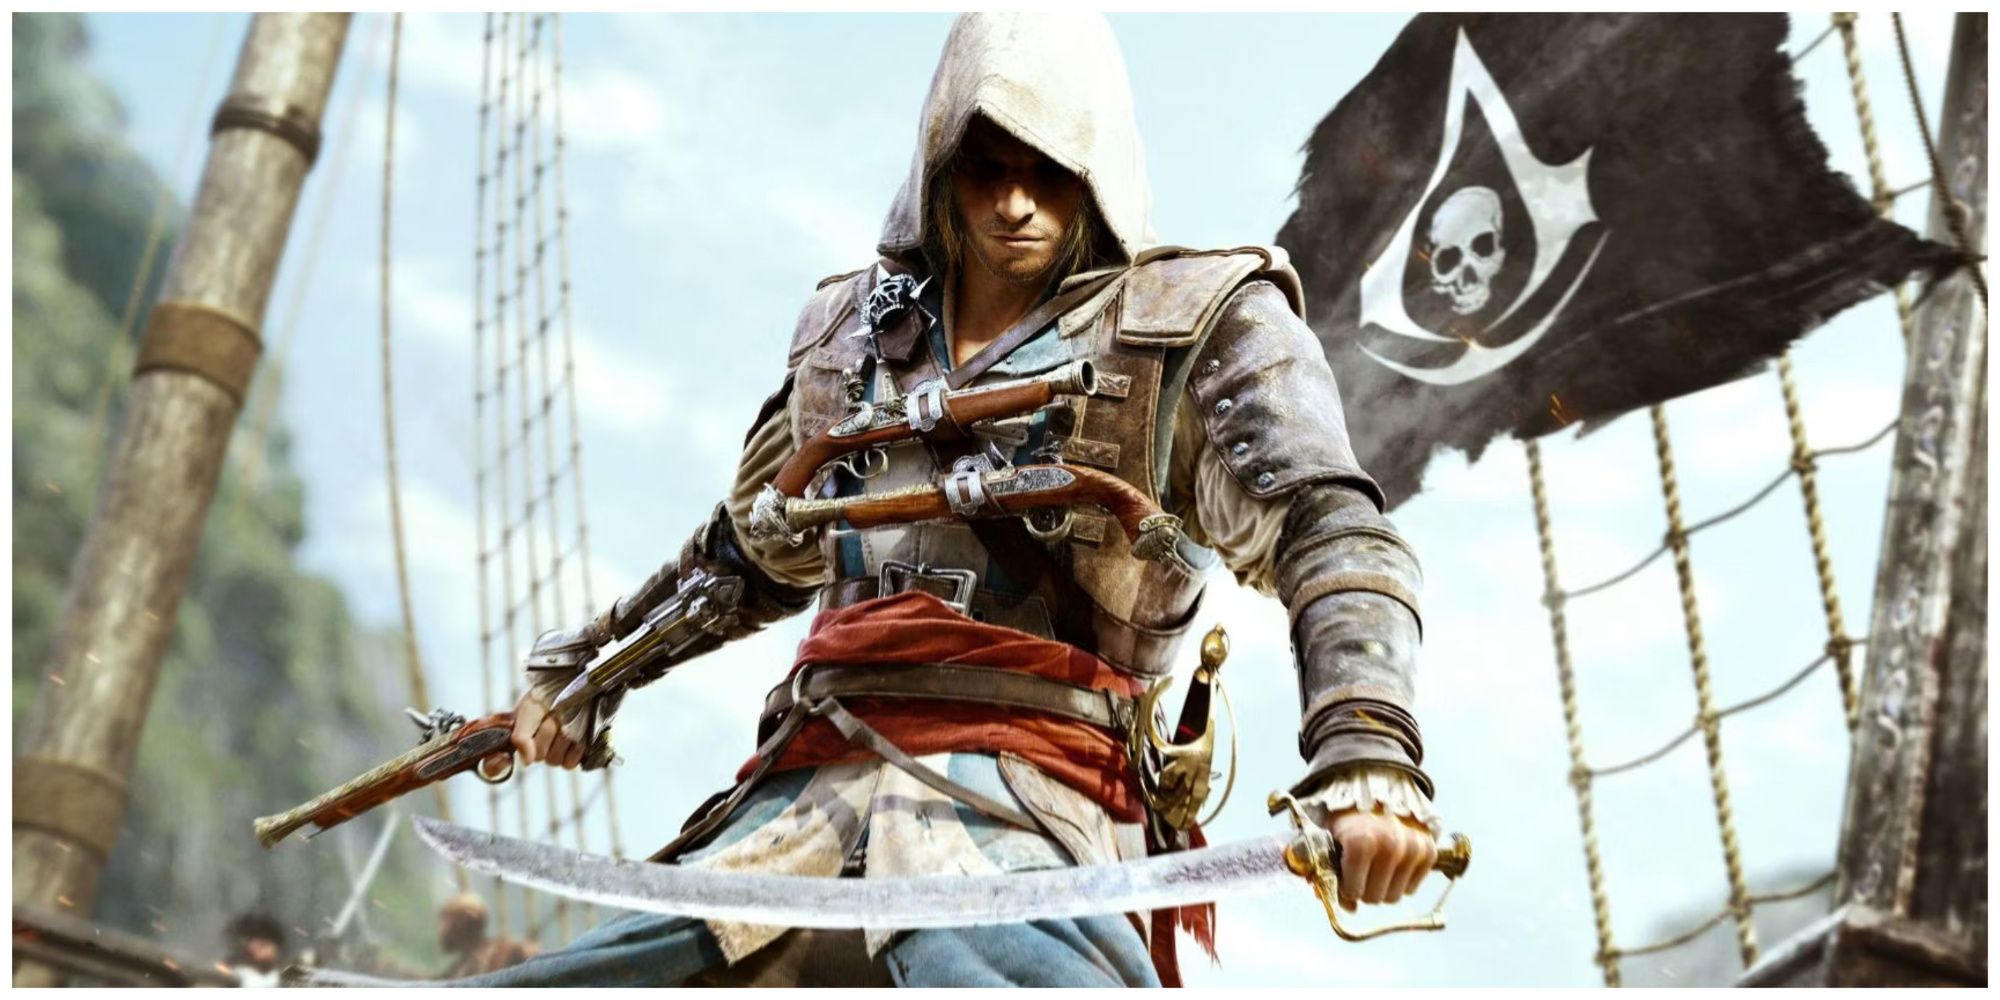 Edward Kenway holding a sword and a pistol with a black pirate flag in the background